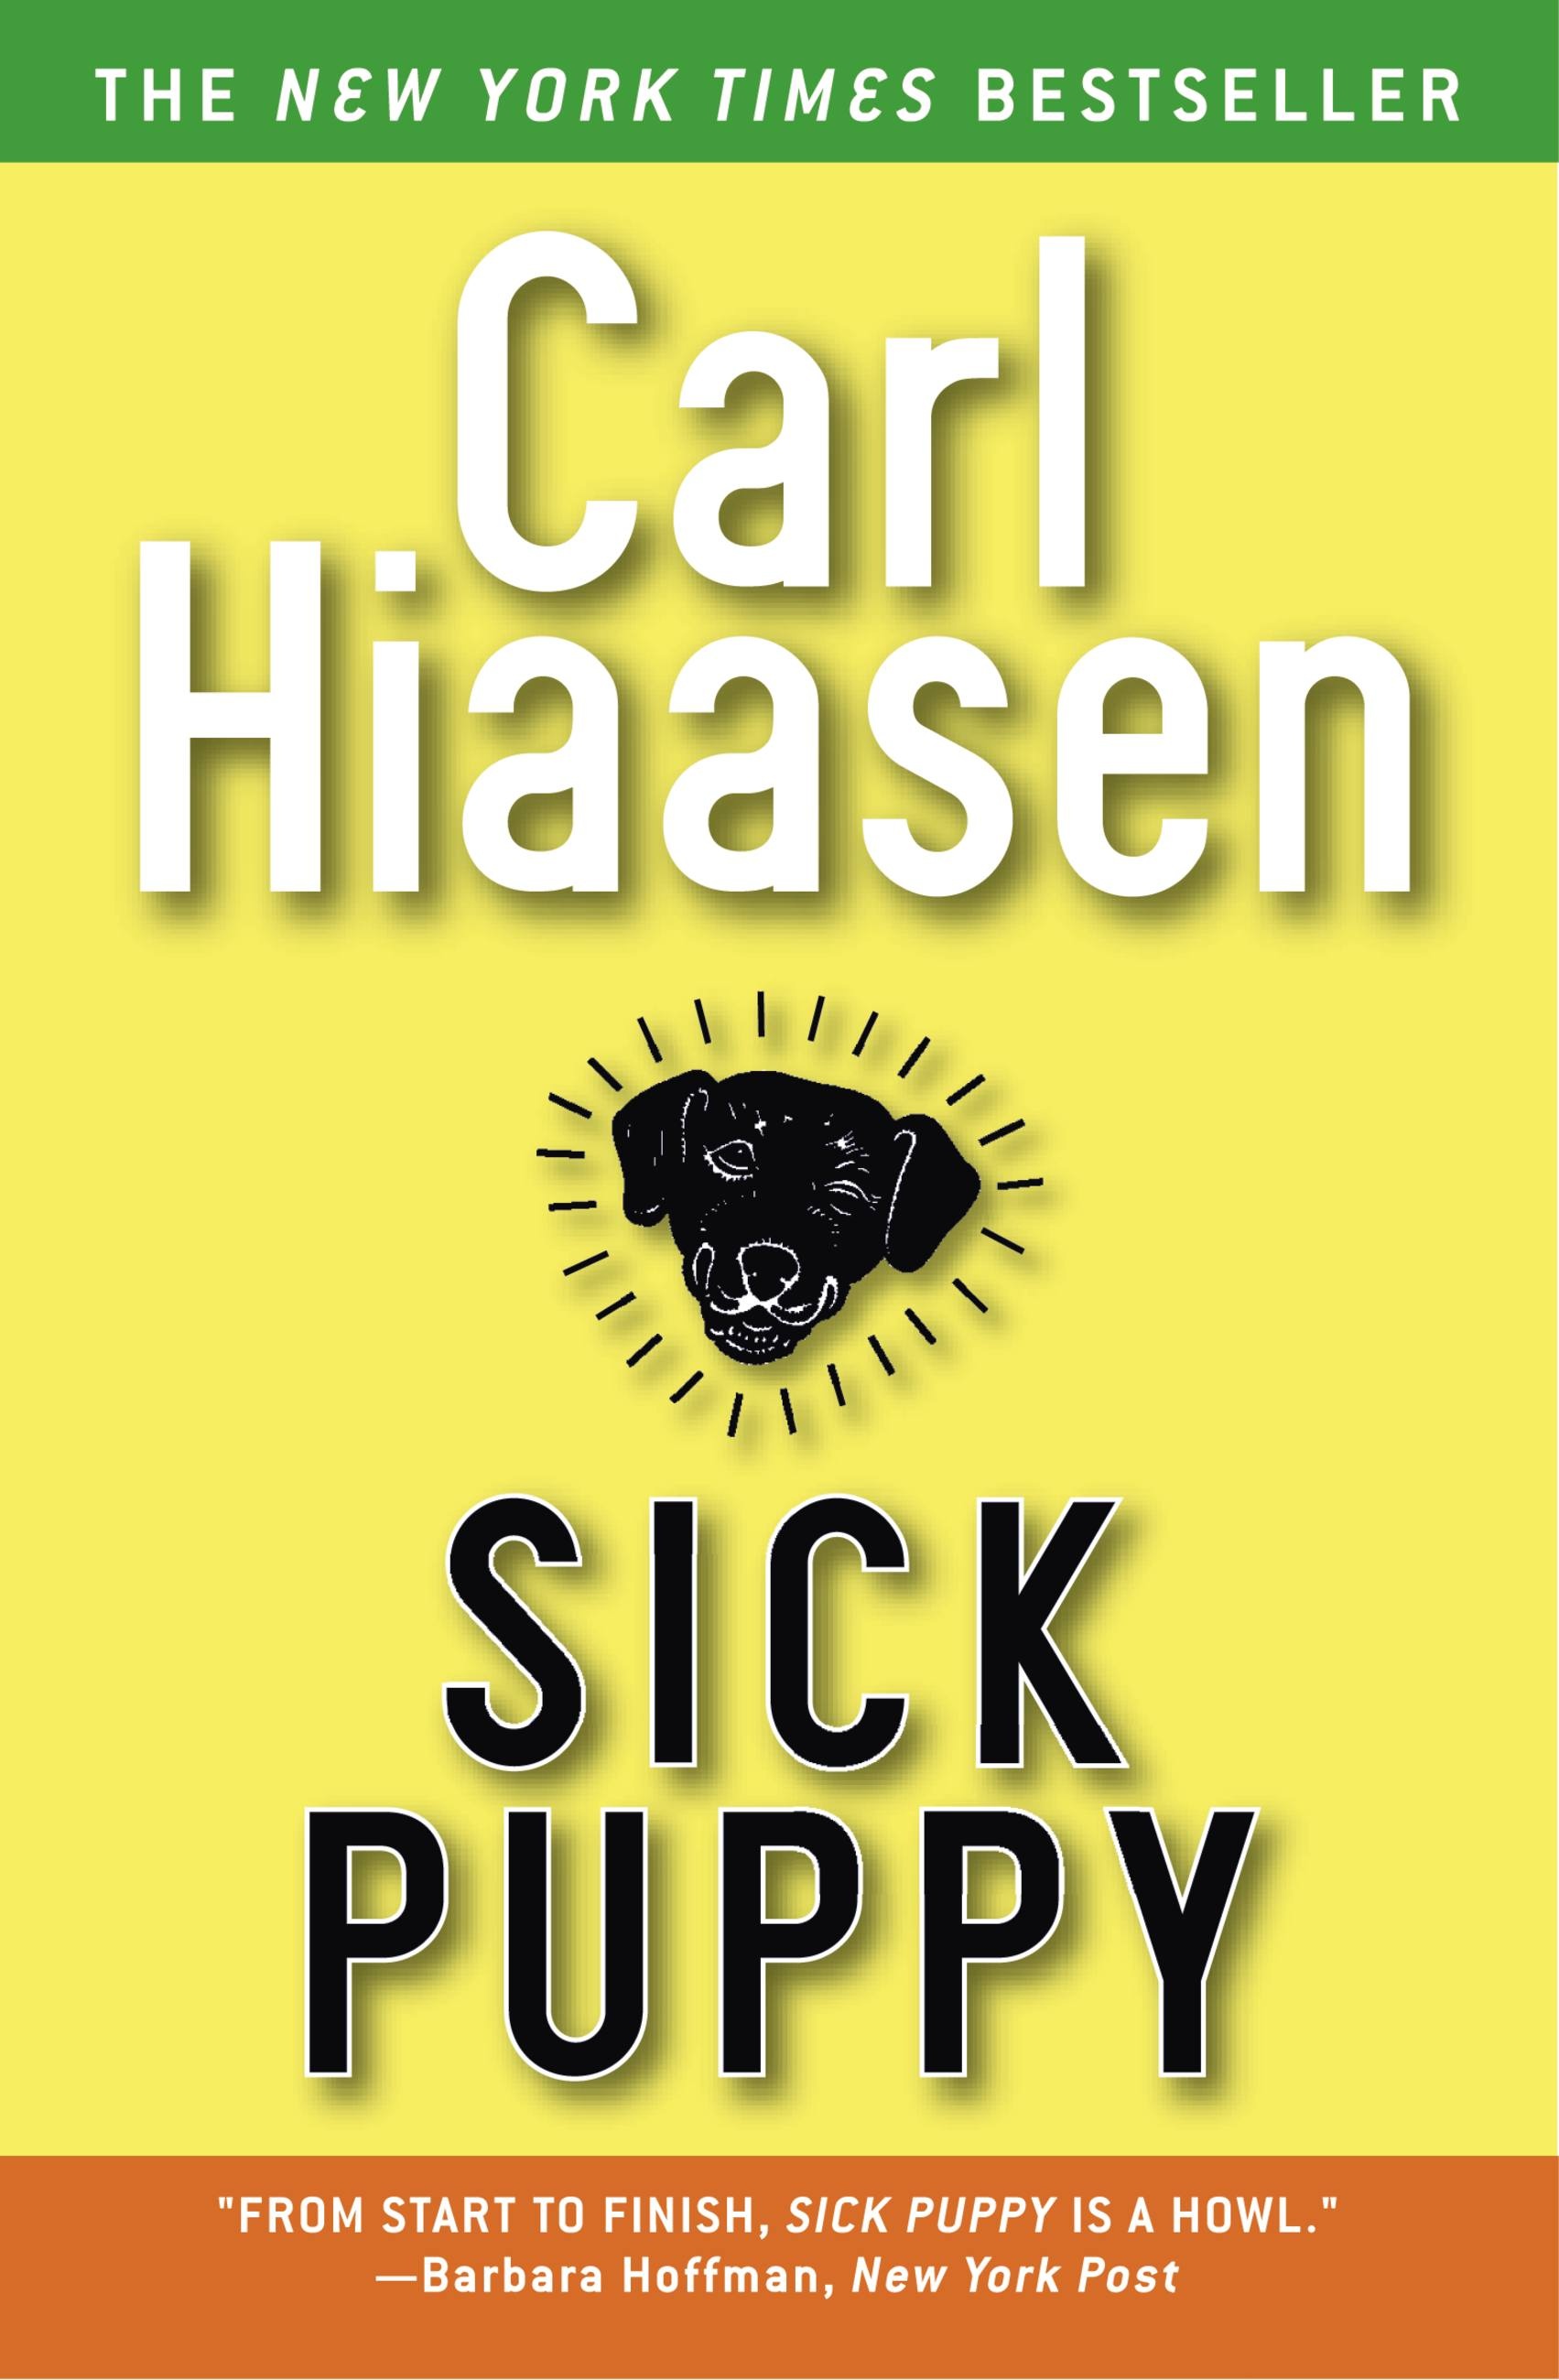 Sick Puppy by Carl Hiaasen Hachette Book Group picture